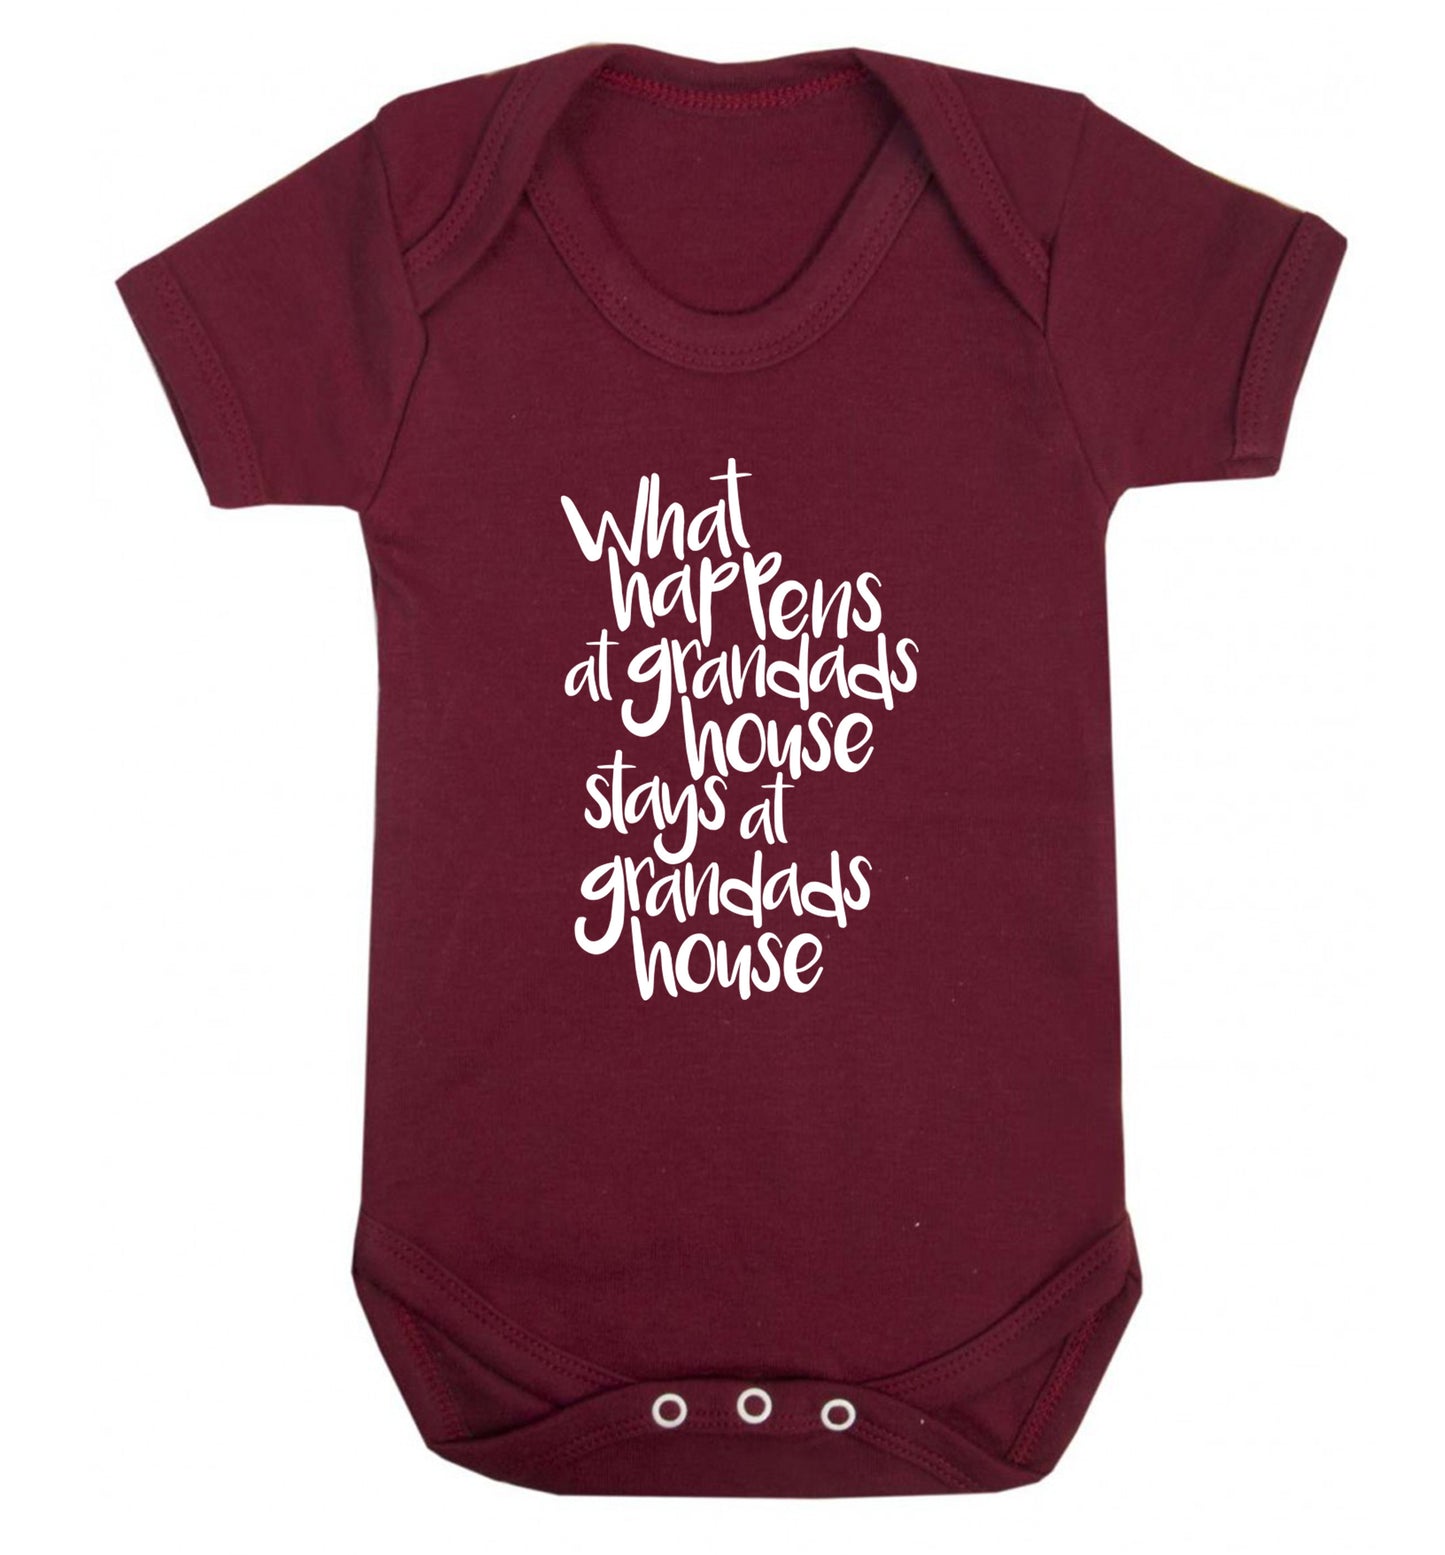 What happens at grandads house stays at grandads house Baby Vest maroon 18-24 months